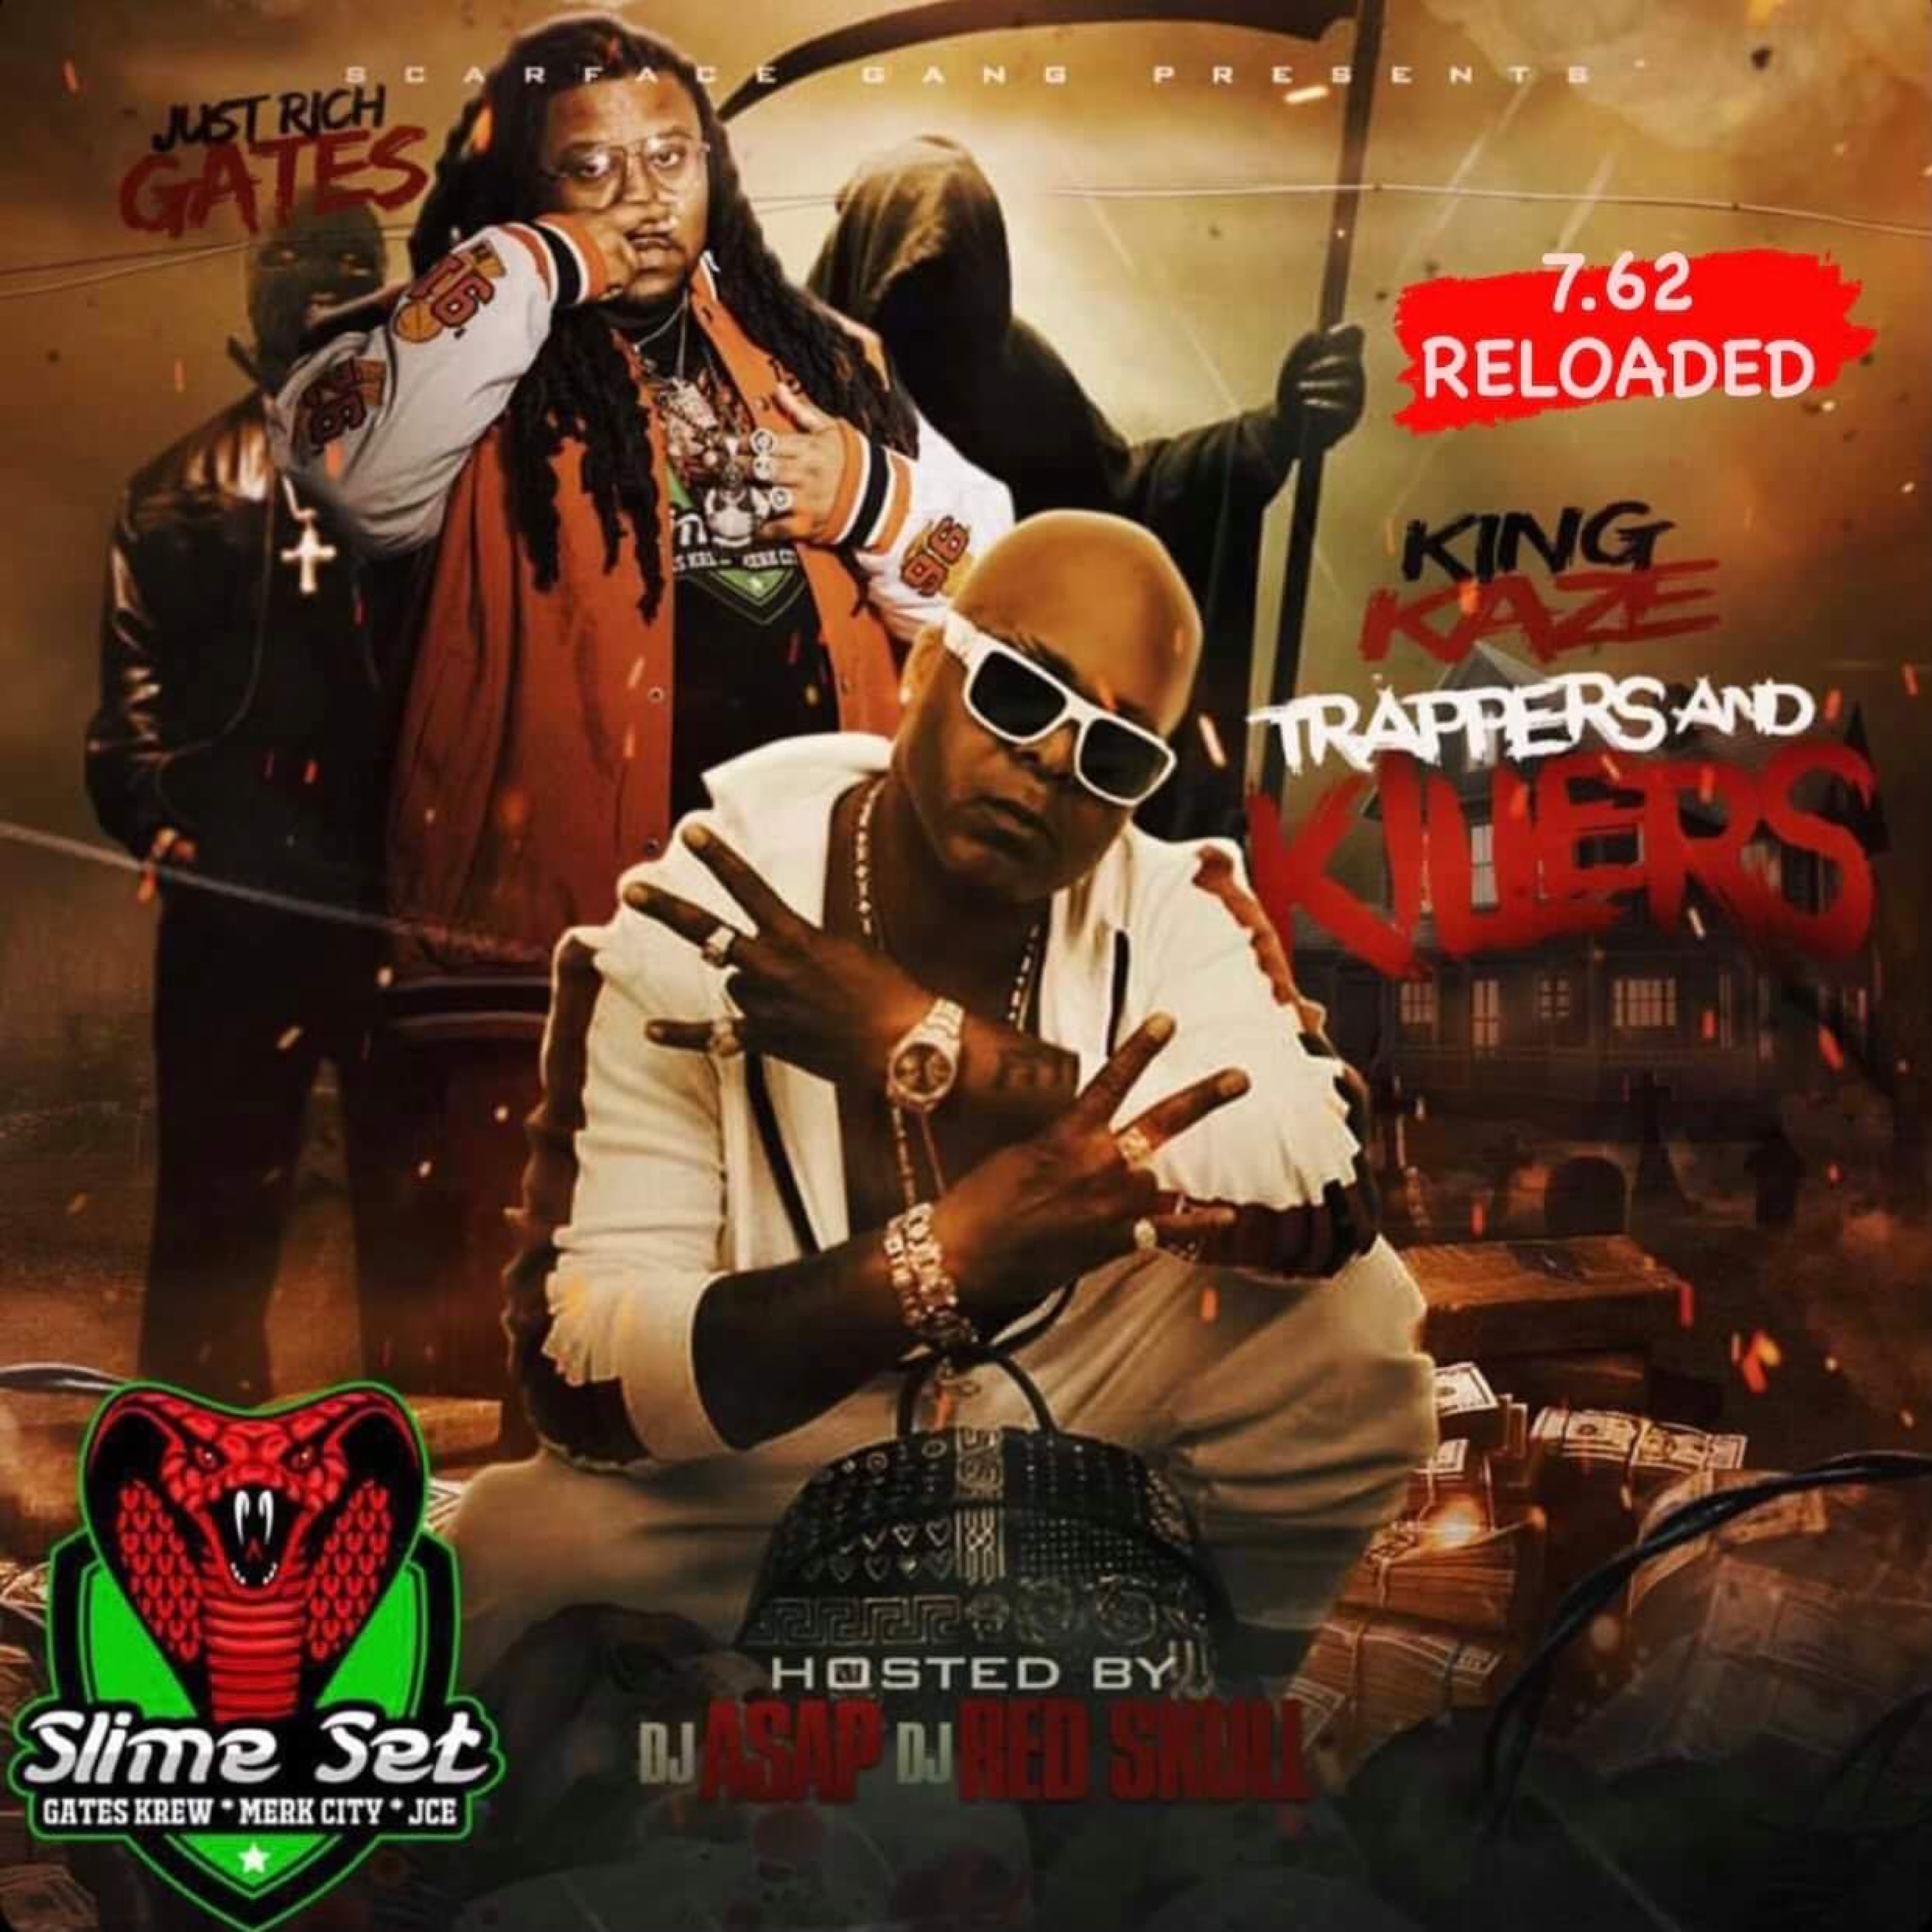 Just Rich Gates & King Kaze - And Killers 7.62 Reloaded Cover Art